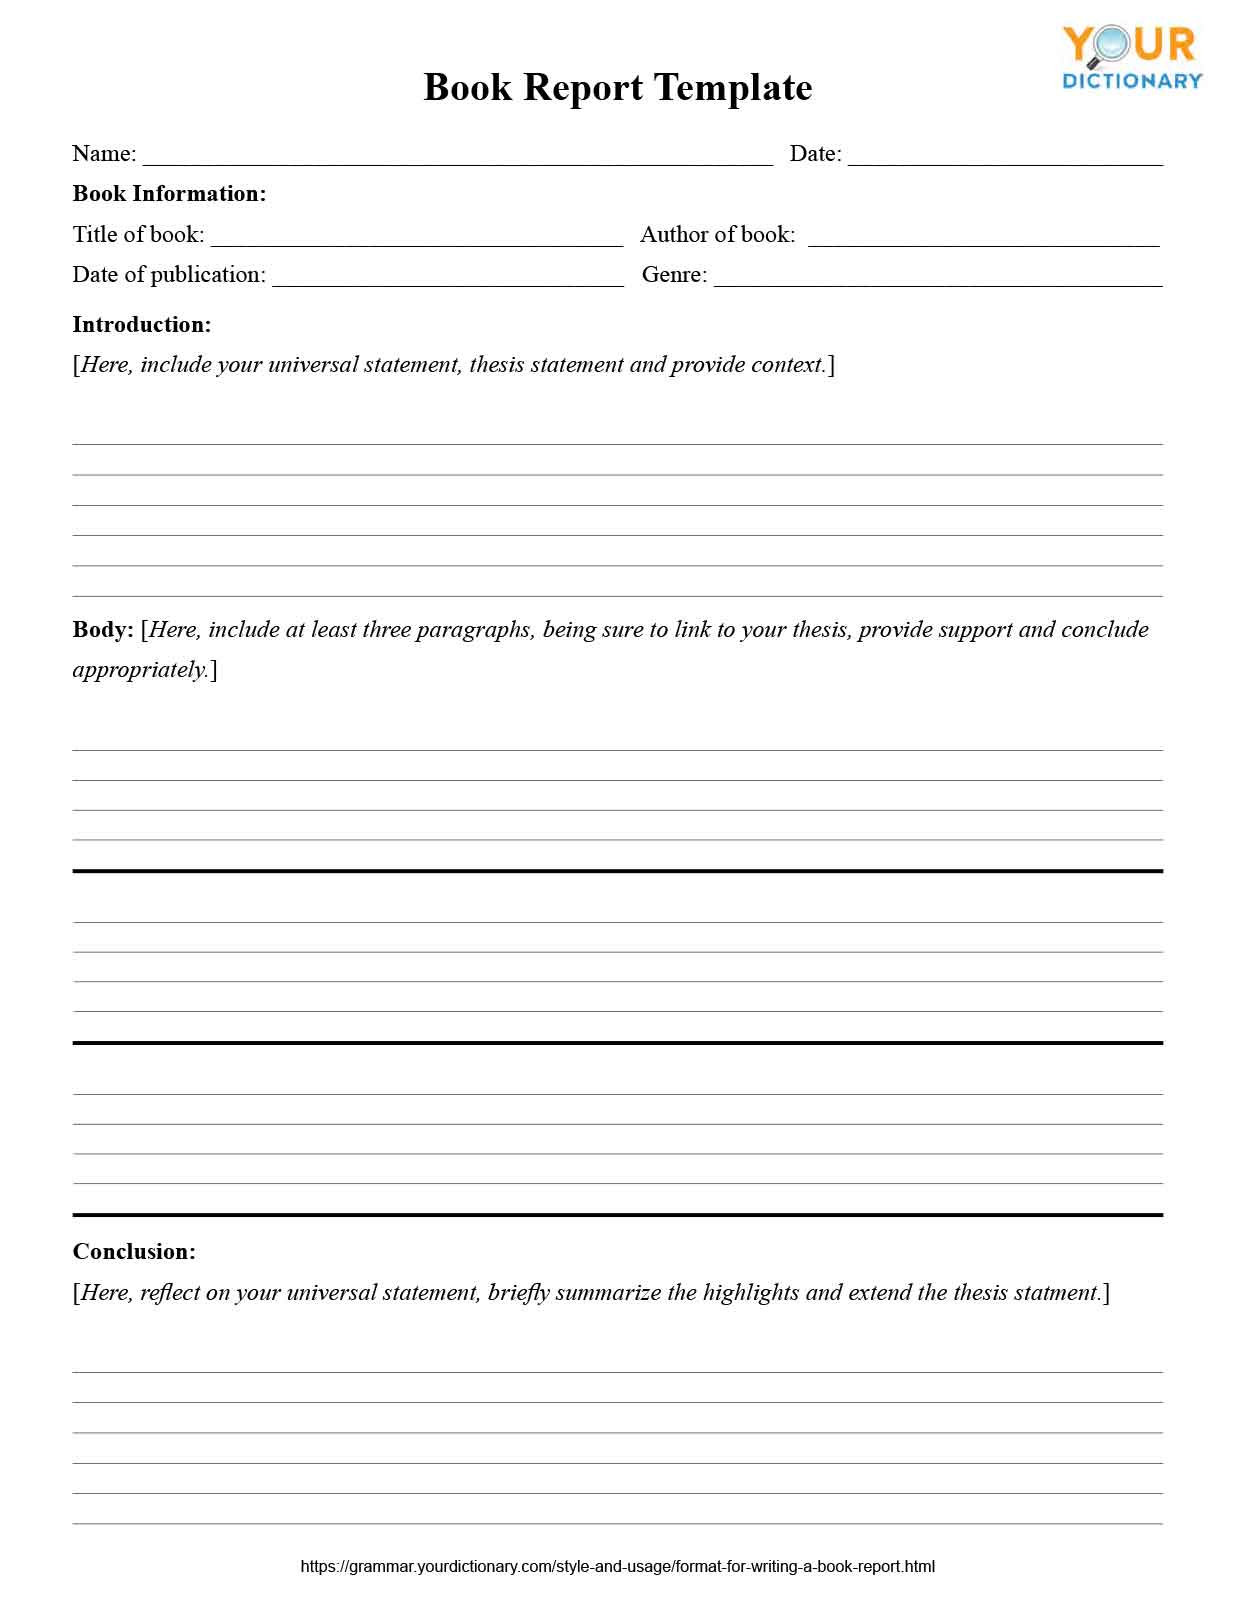 Format For Writing A Book Report With Book Report Template 5Th Grade